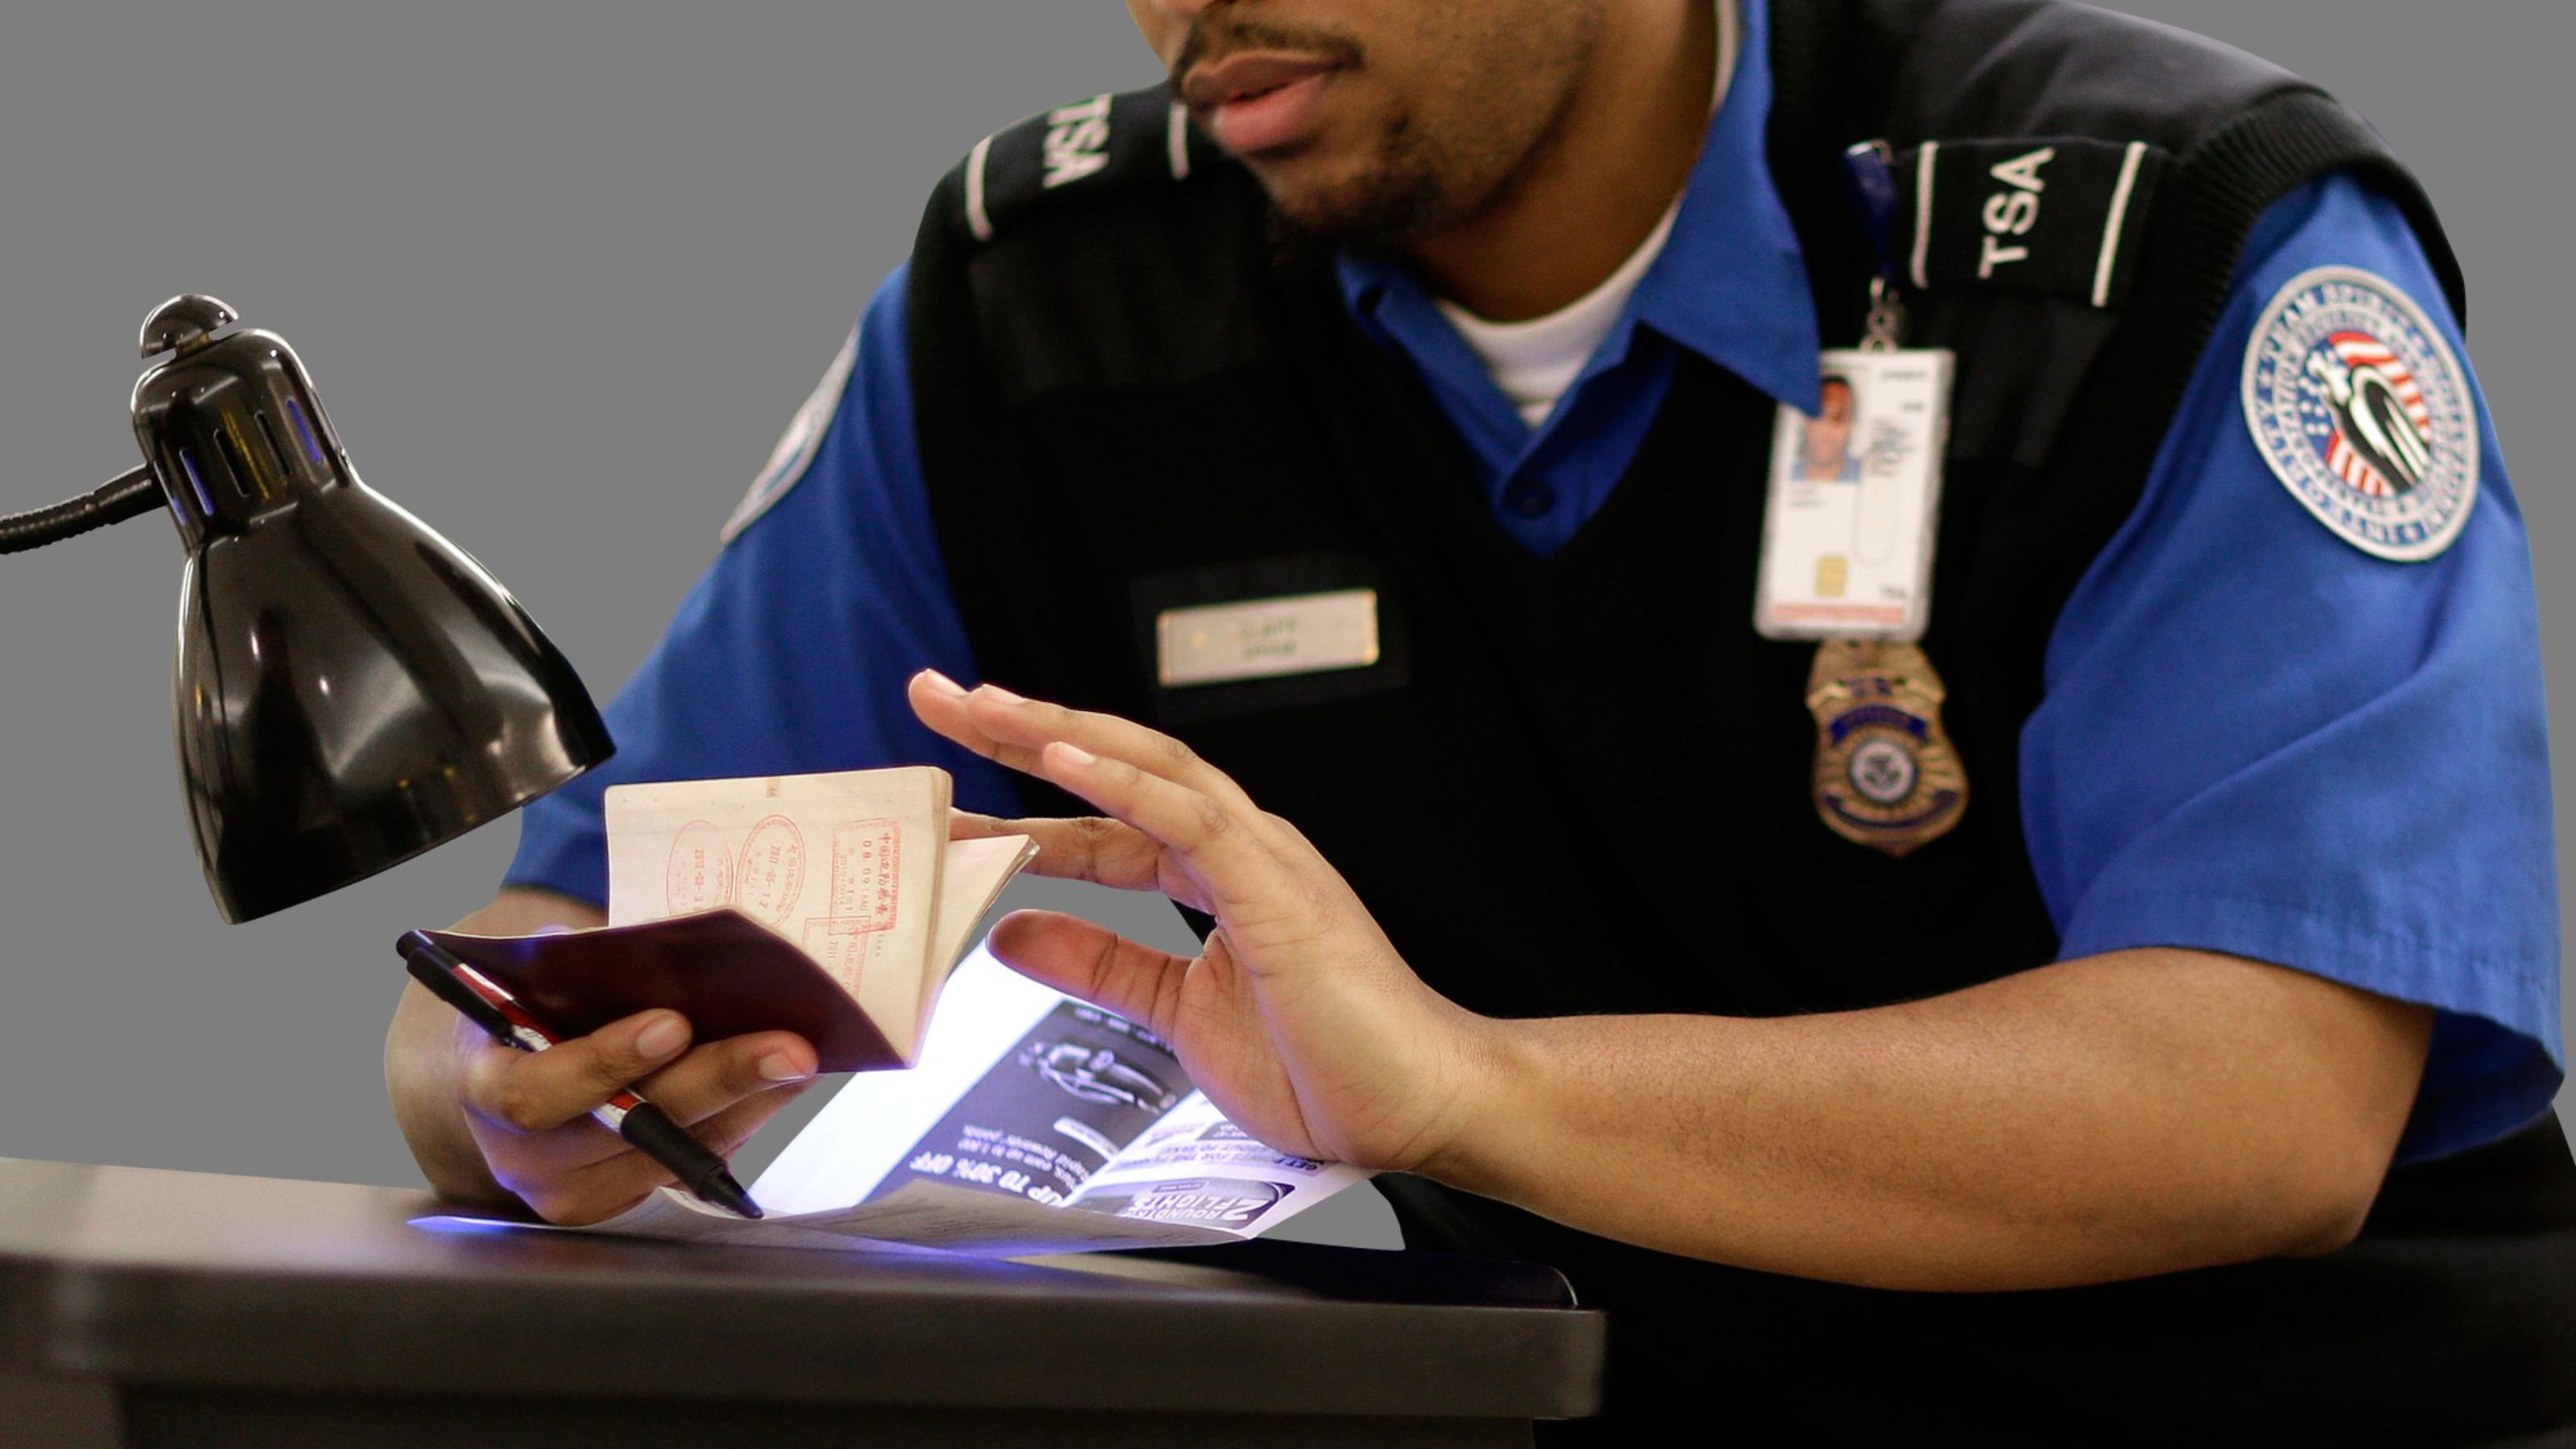 TSA Confusion Over DC License Shows Gross Incompetence